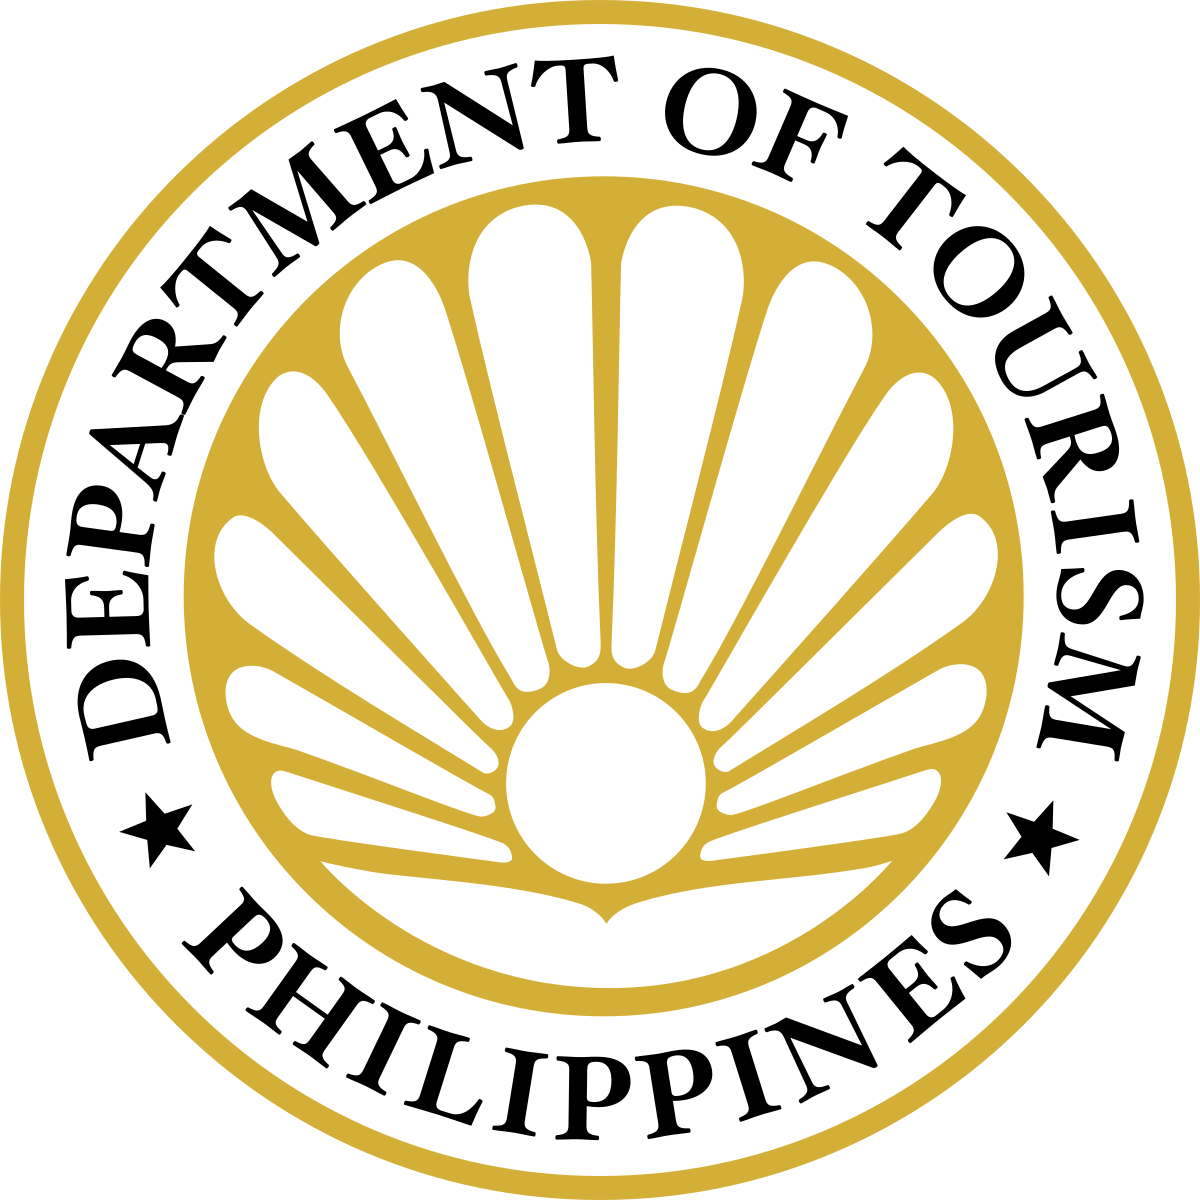 tourism related professional organizations (philippine based)